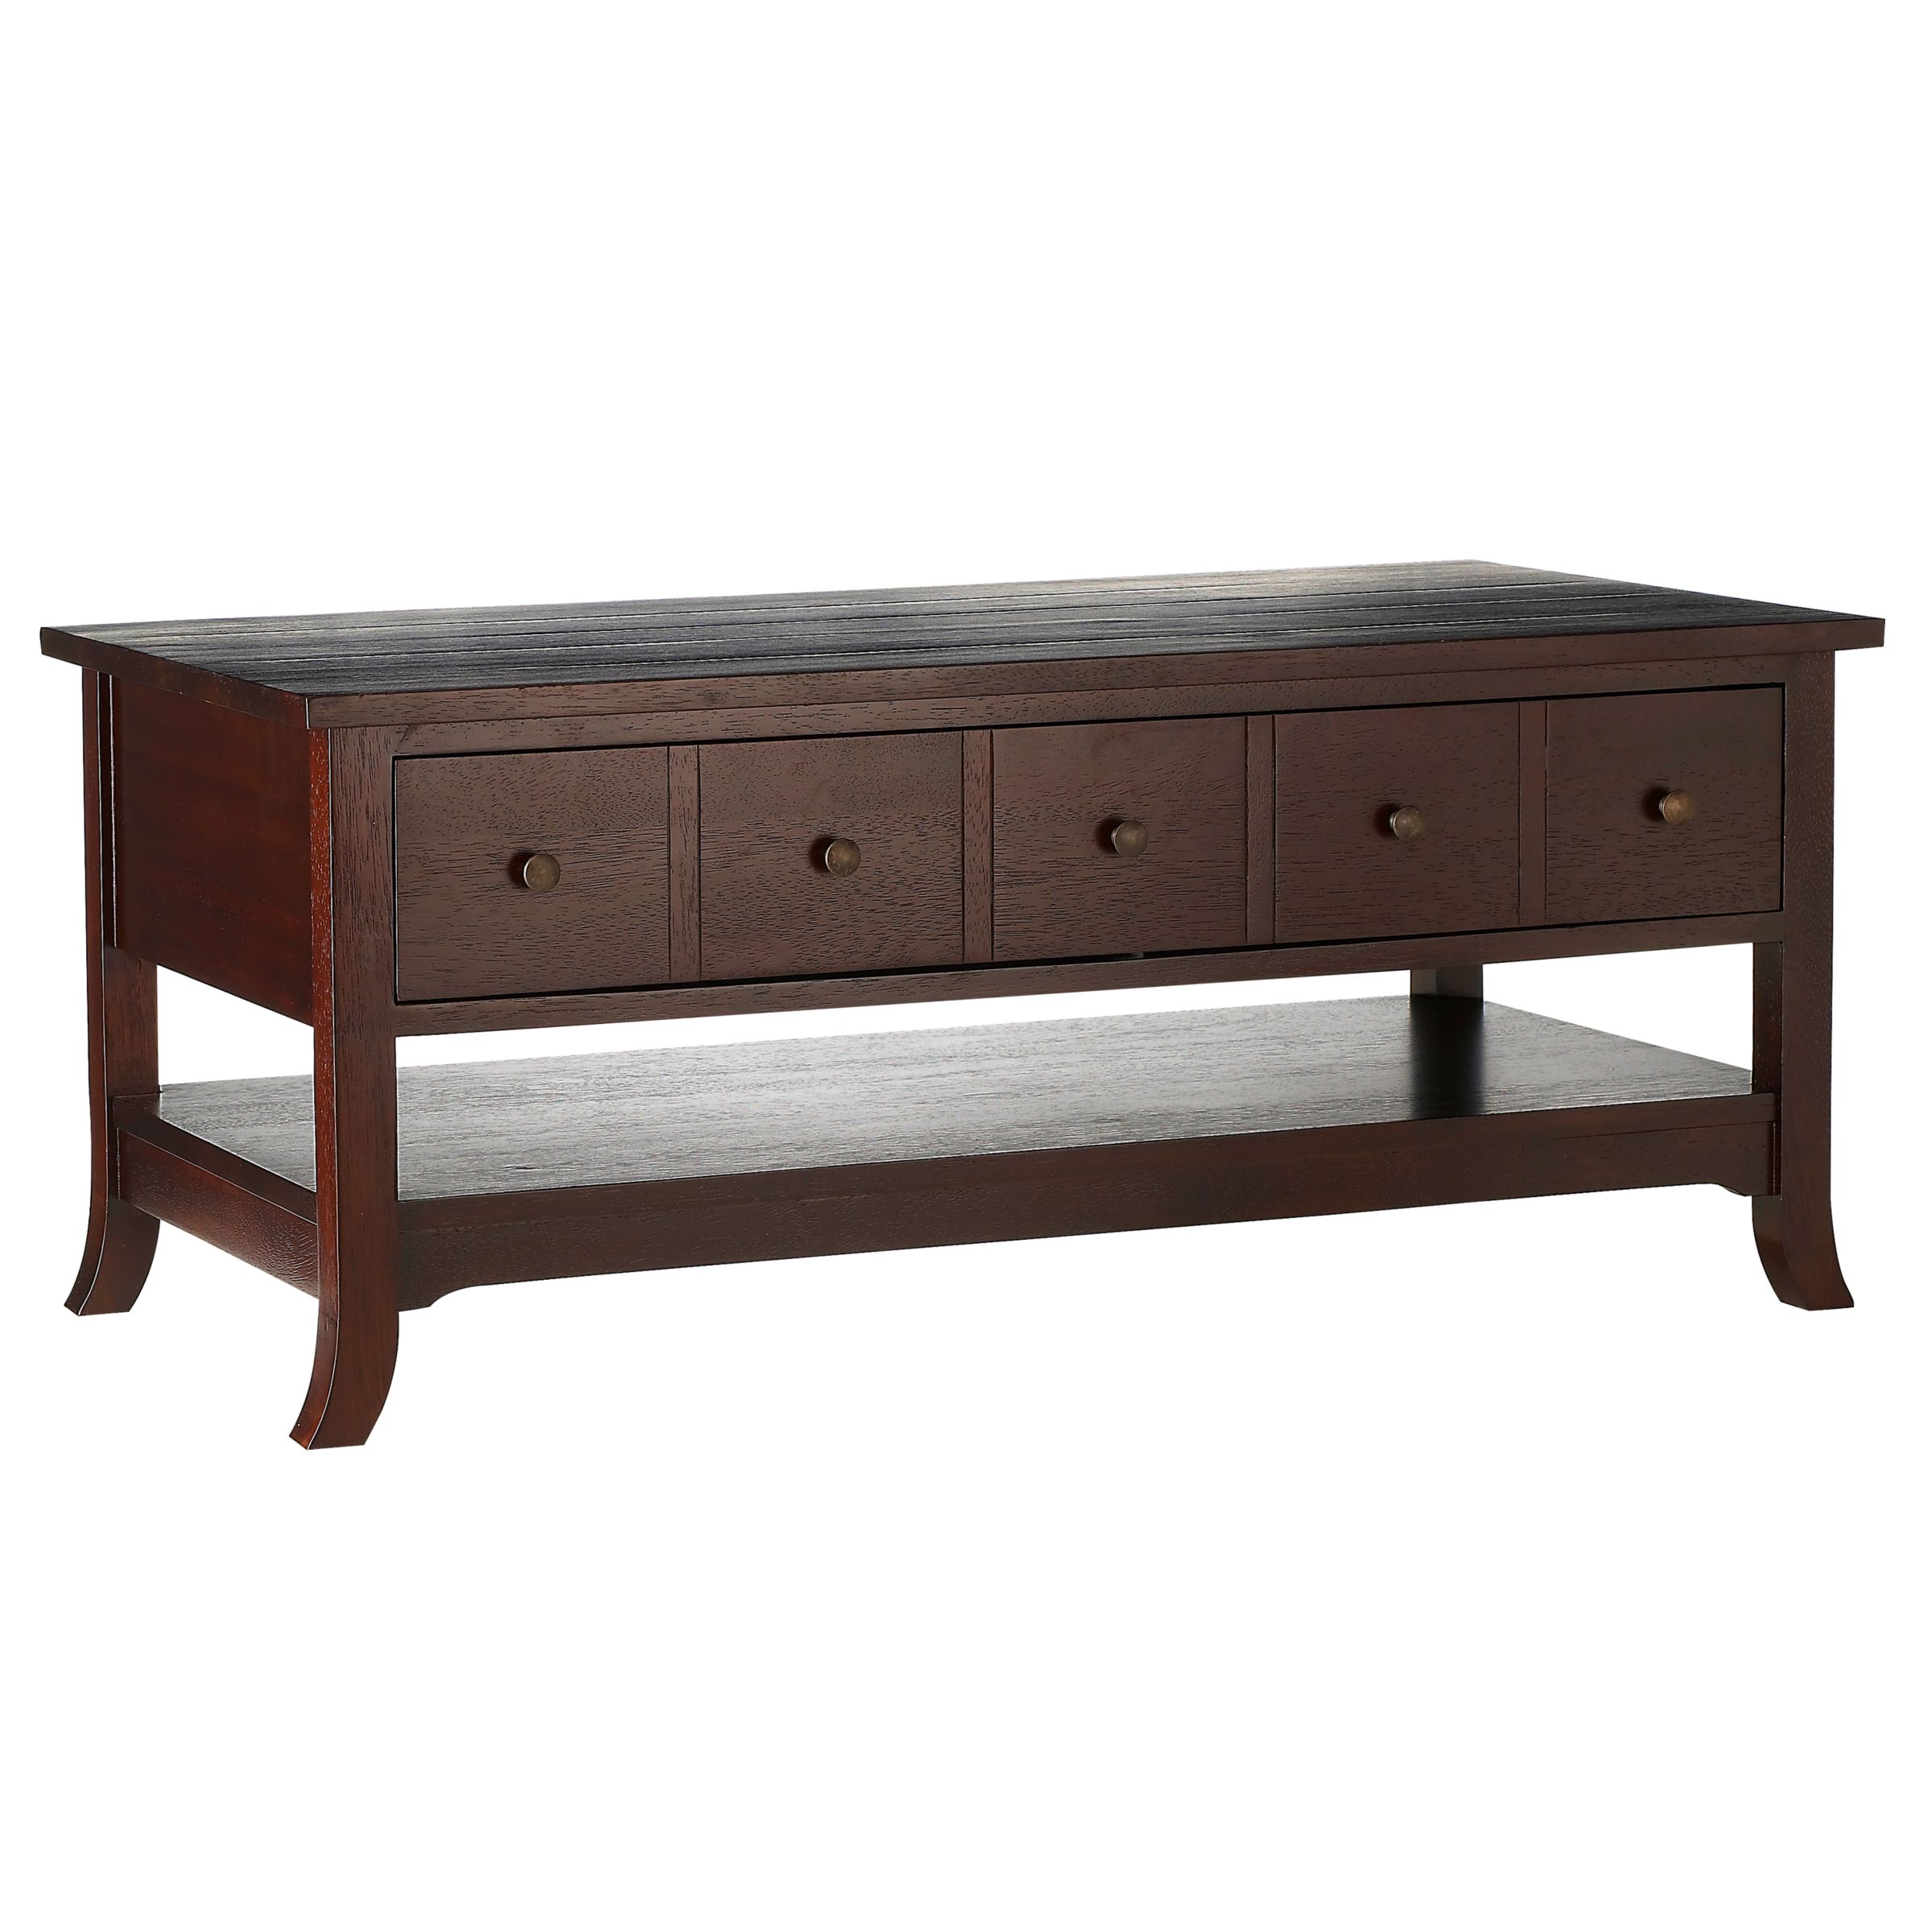 Orchard 1 Drawer Coffee Table